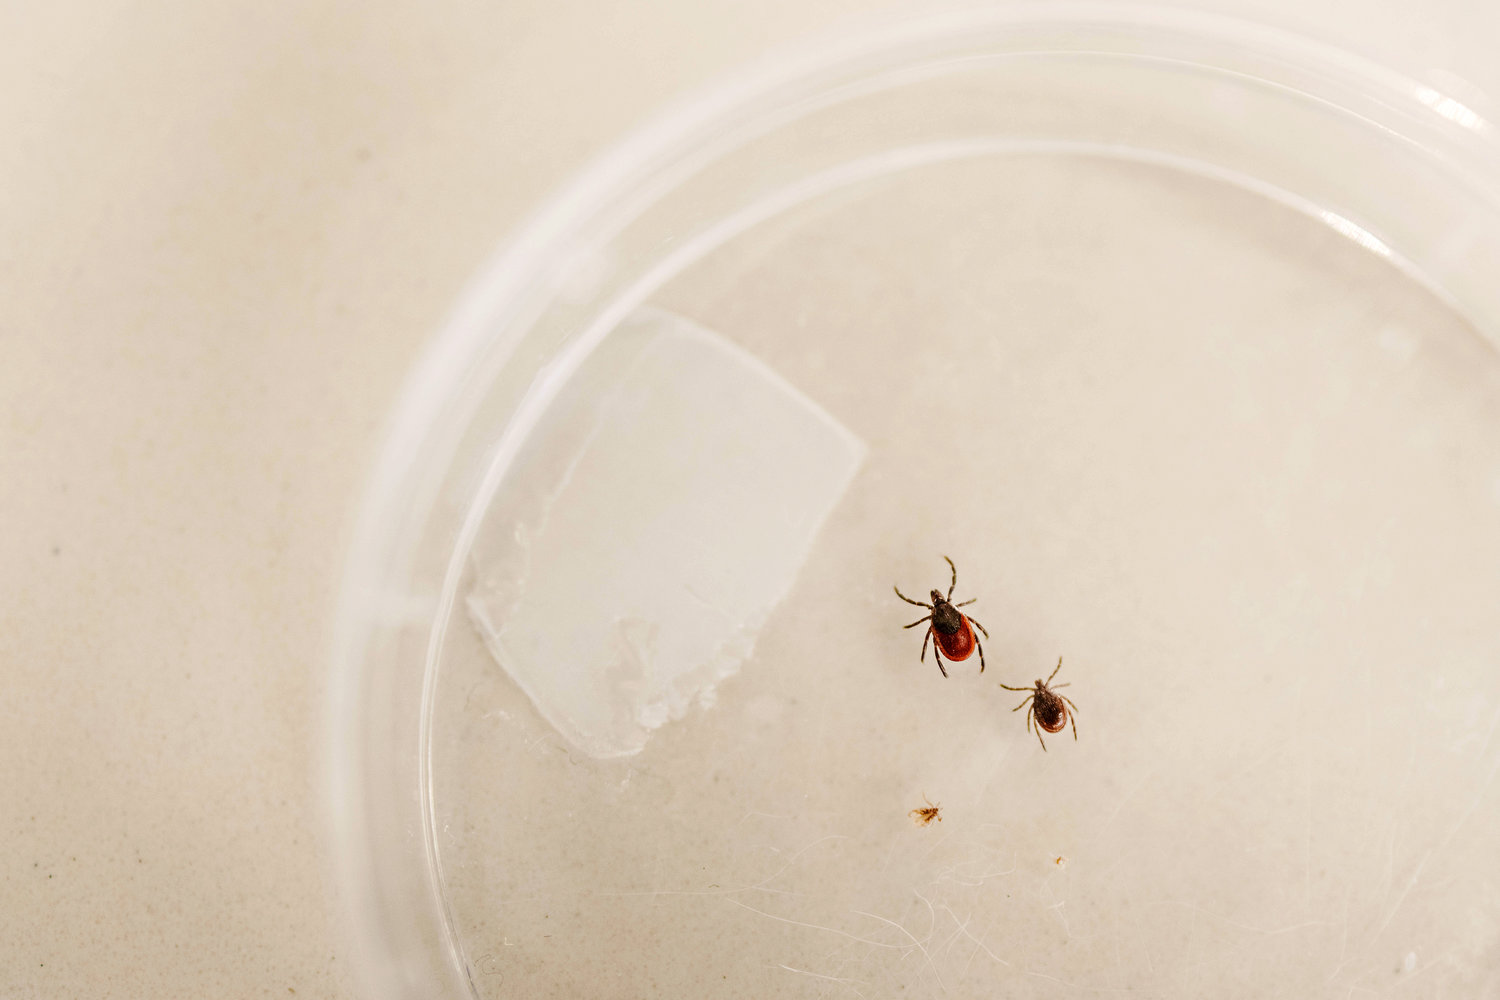 At the Connecticut Agricultural Experiment Station in New Haven, Dr. Goudarz Molaei and his team study and research ticks brought in from the public. The tick on the left is a female adult deer tick. The tick on the right is a dog tick. Tony Spinelli/Connecticut Public